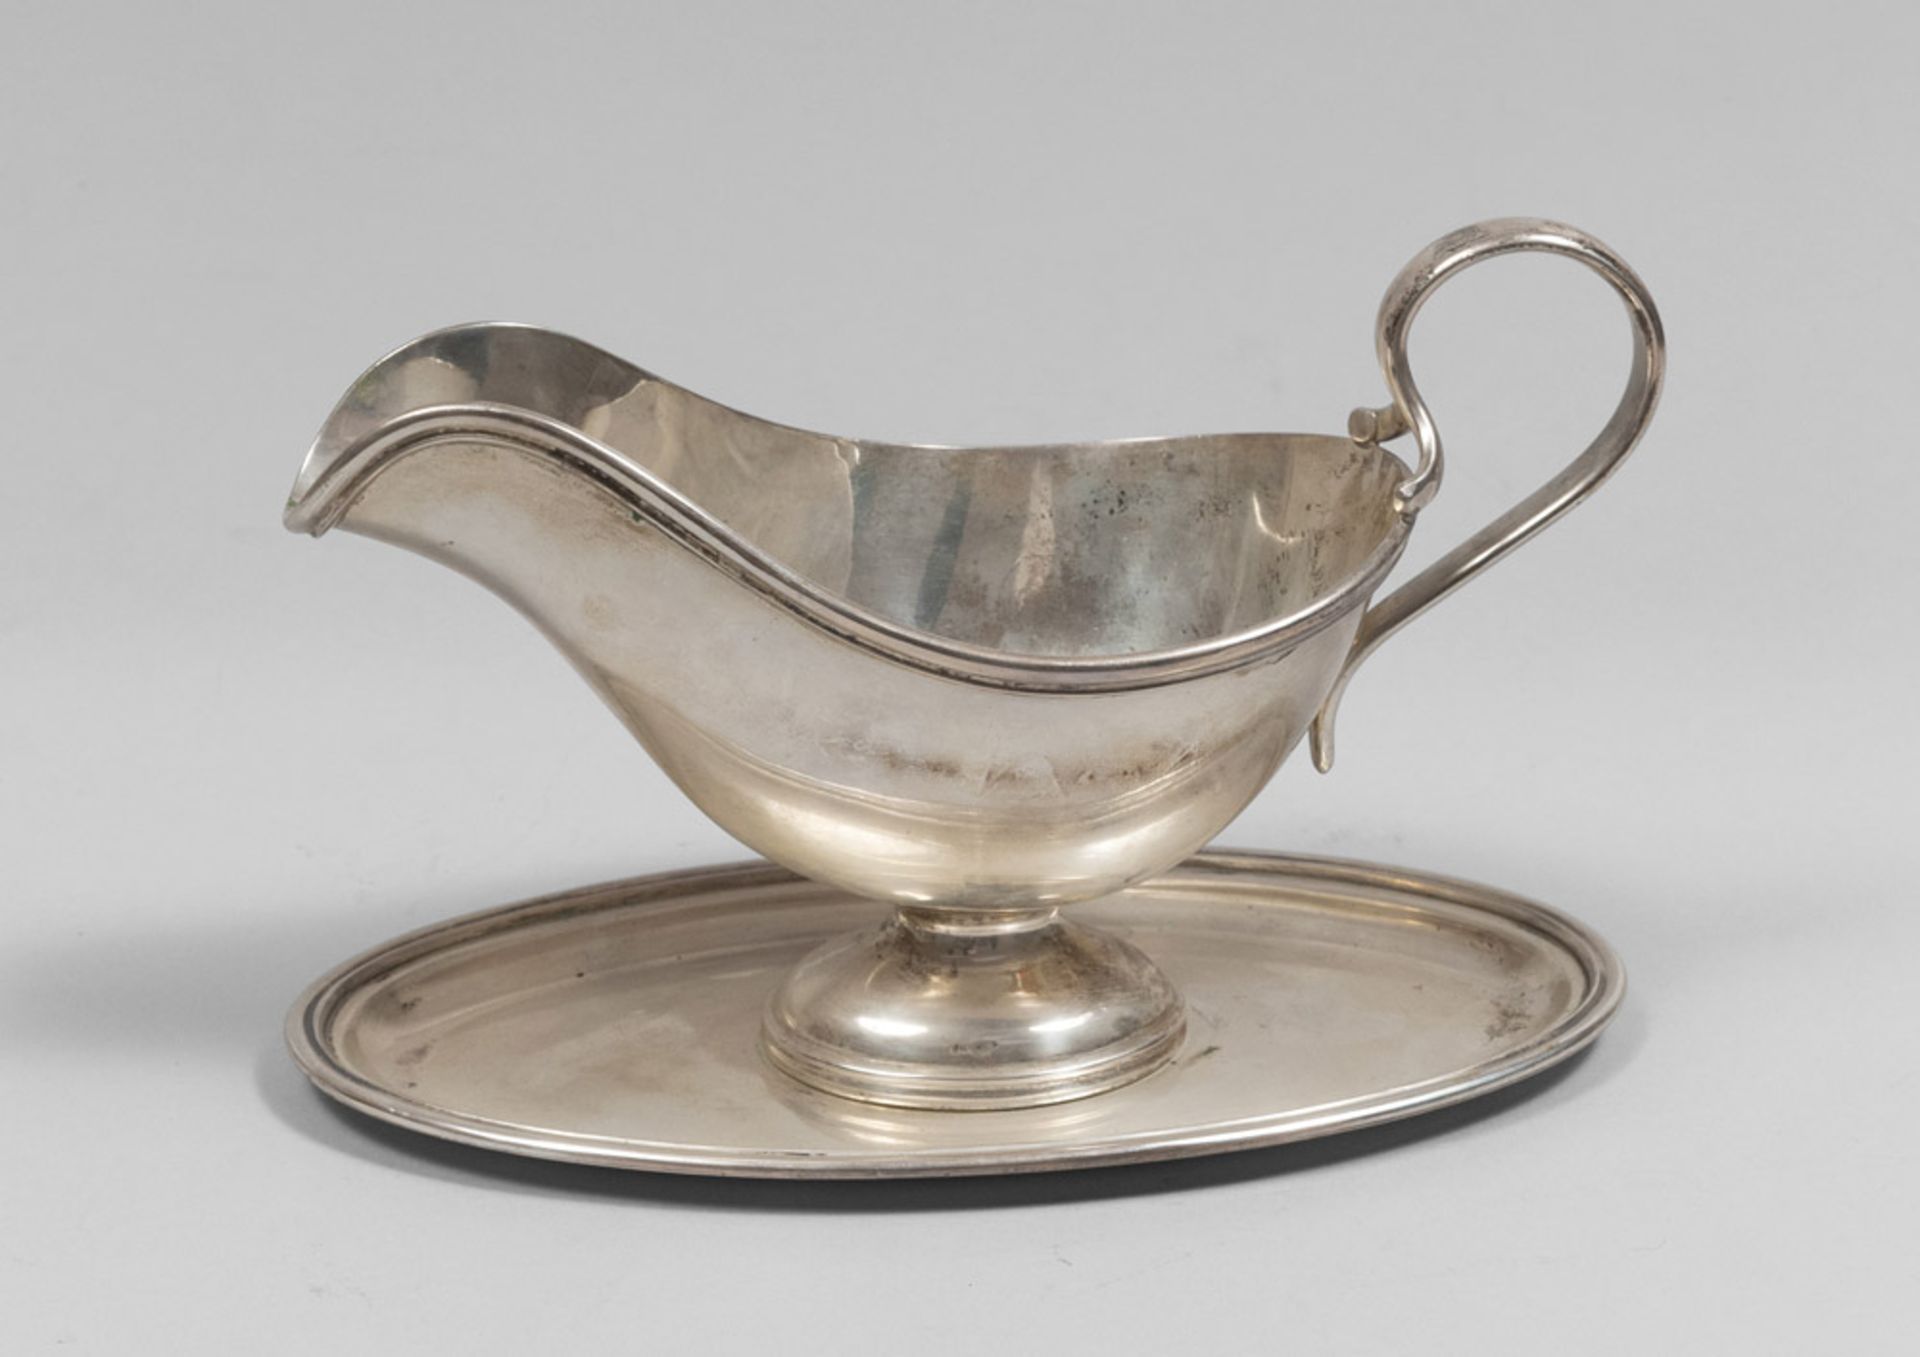 Silver sauce-boat, 20th century. Measures cm. 13 x 13 x 22,5, weight gr. 588.SALSIERA IN ARGENTO, XX